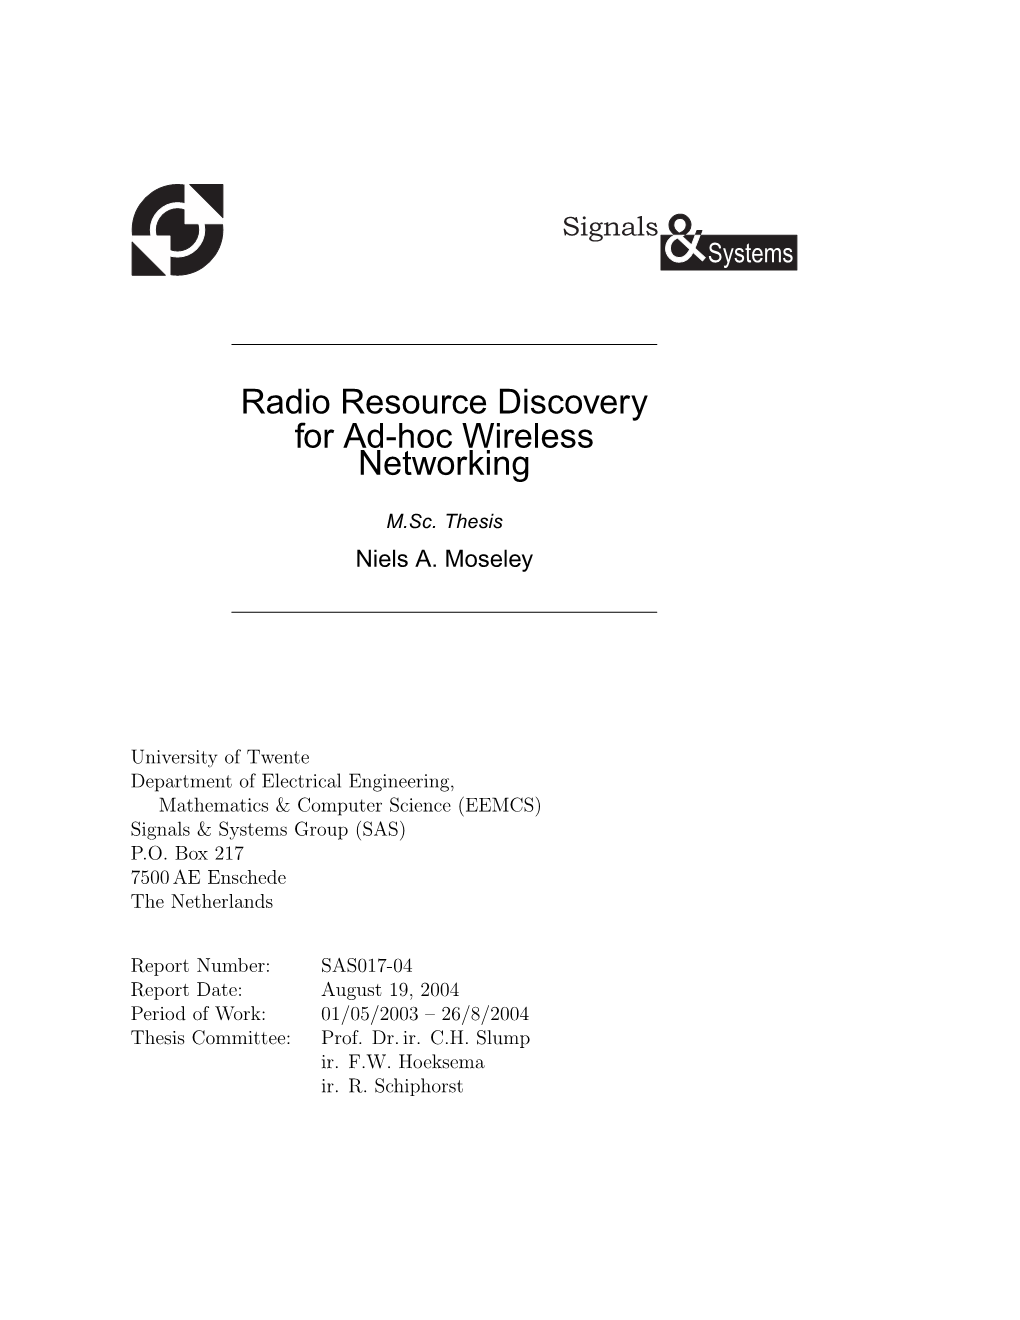 Radio Resource Discovery for Ad-Hoc Wireless Networking